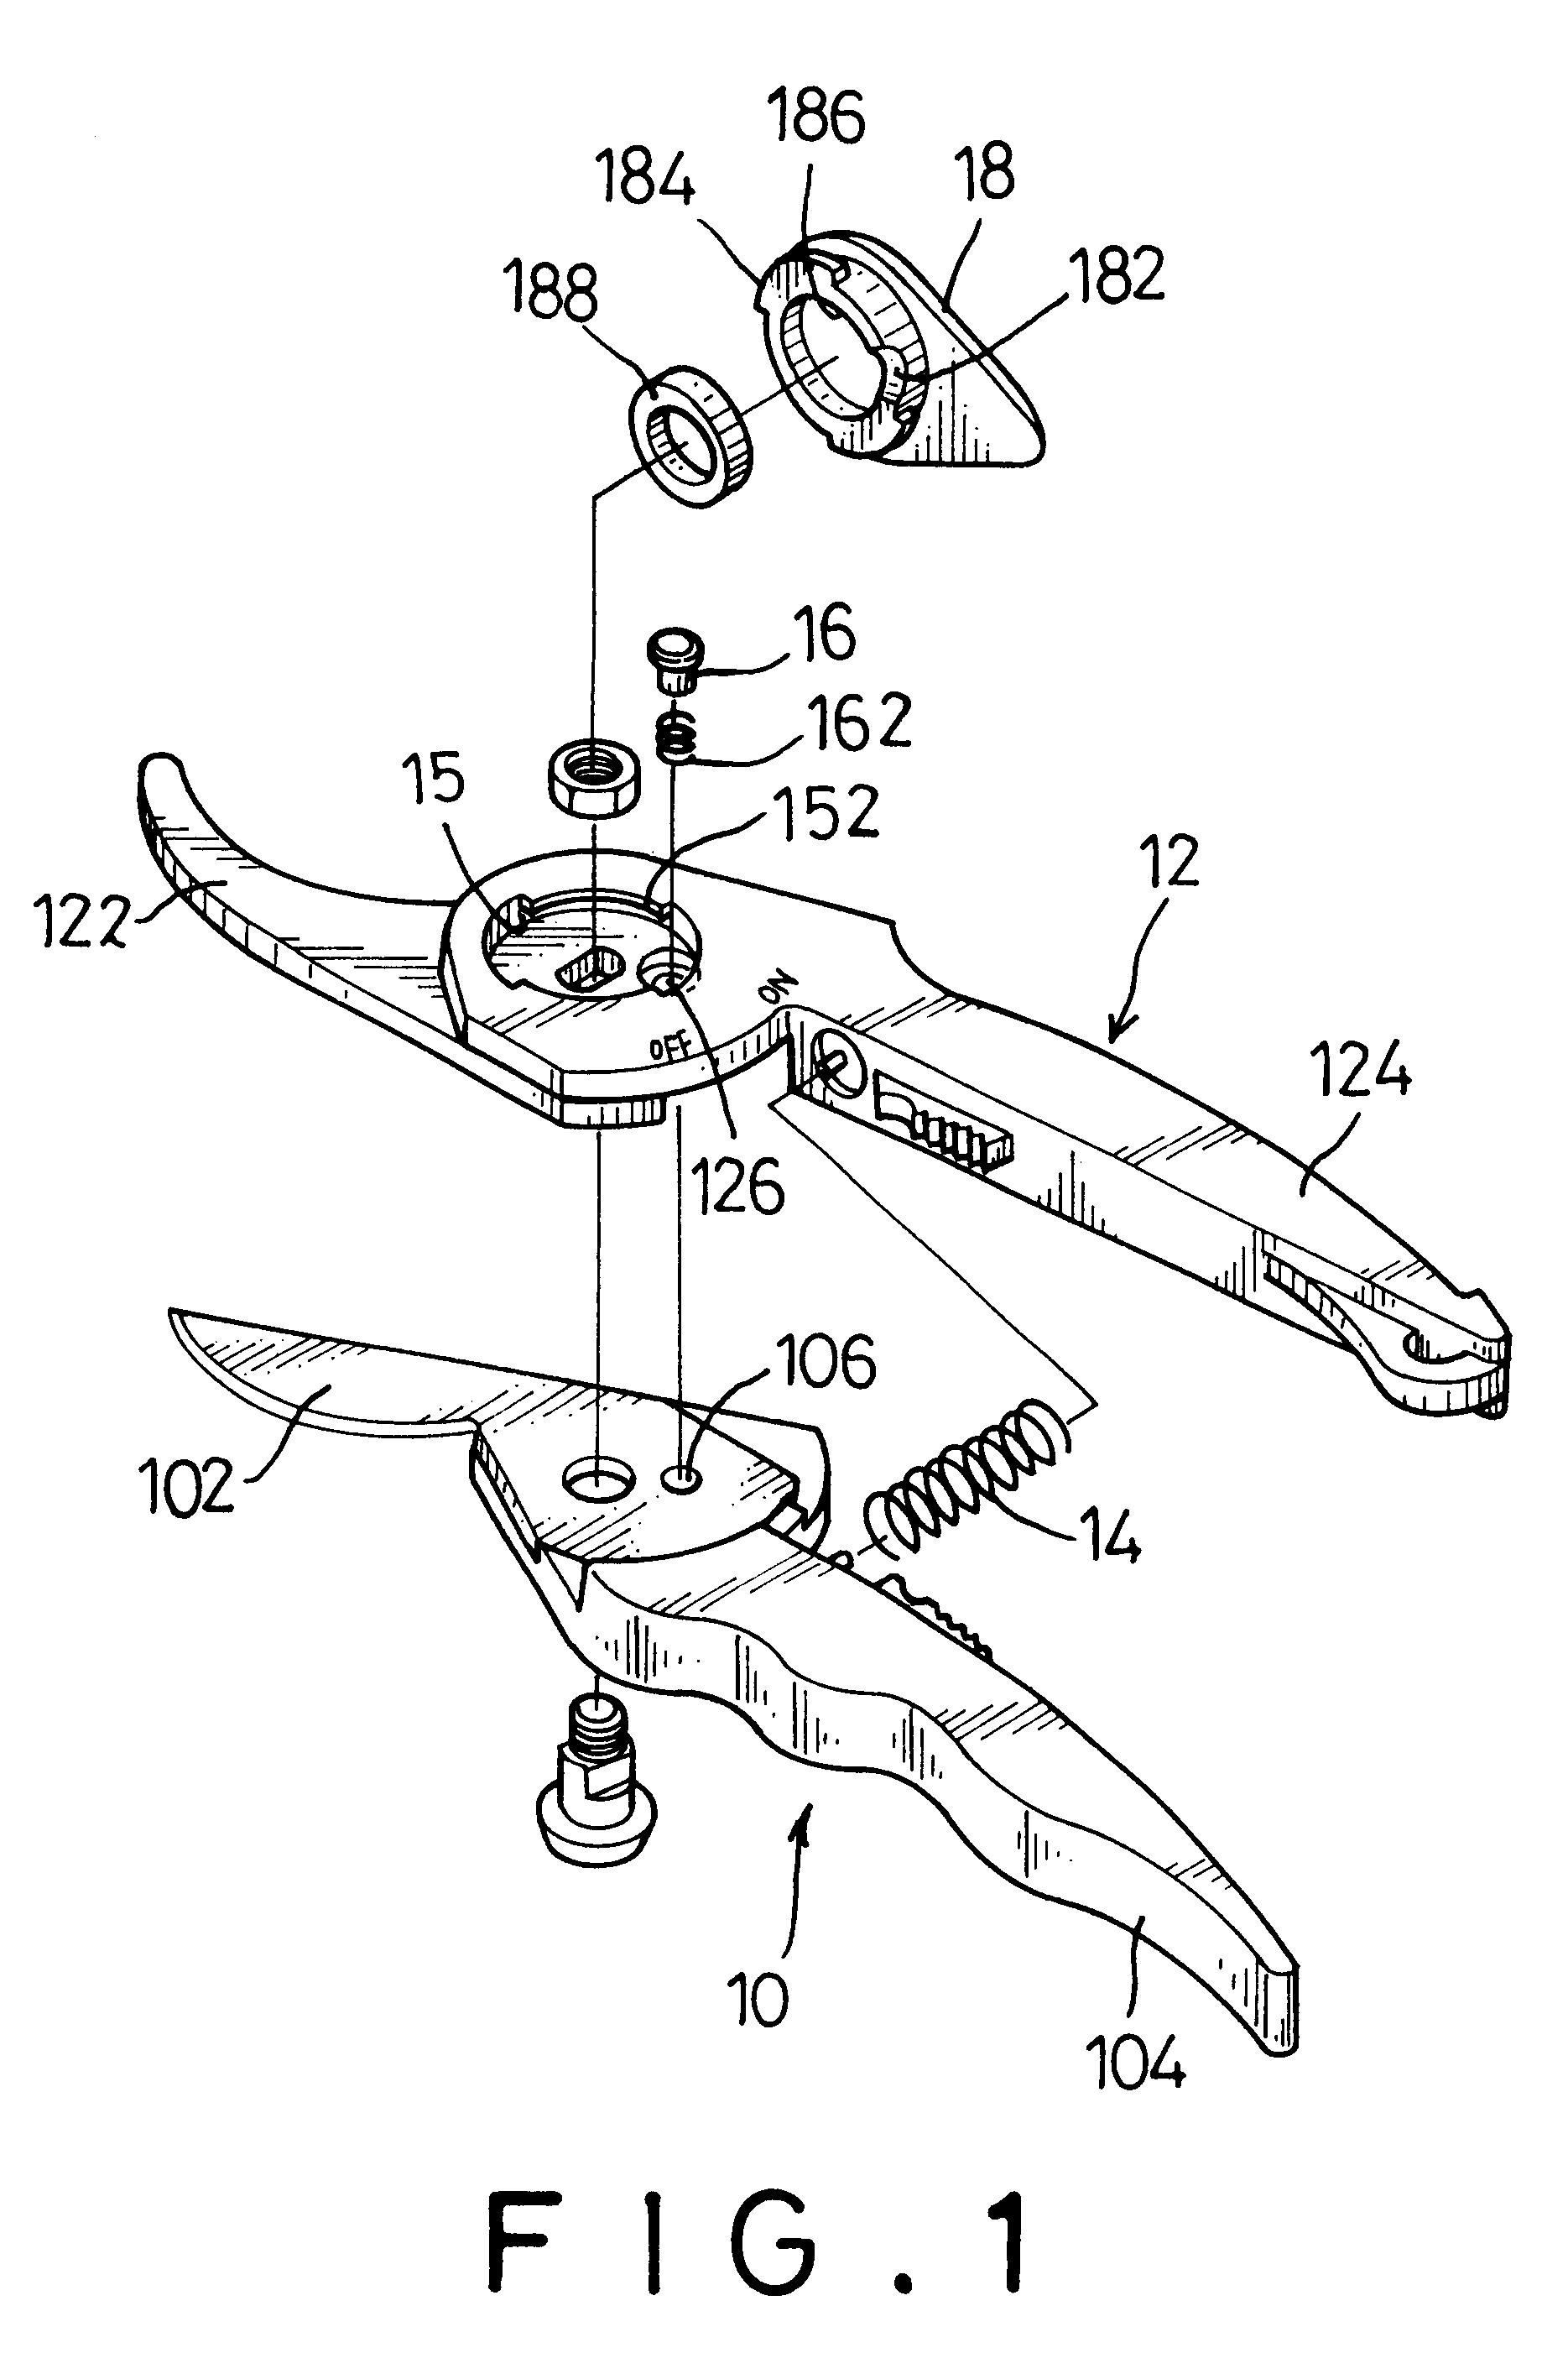 Pruning shears with a lock device